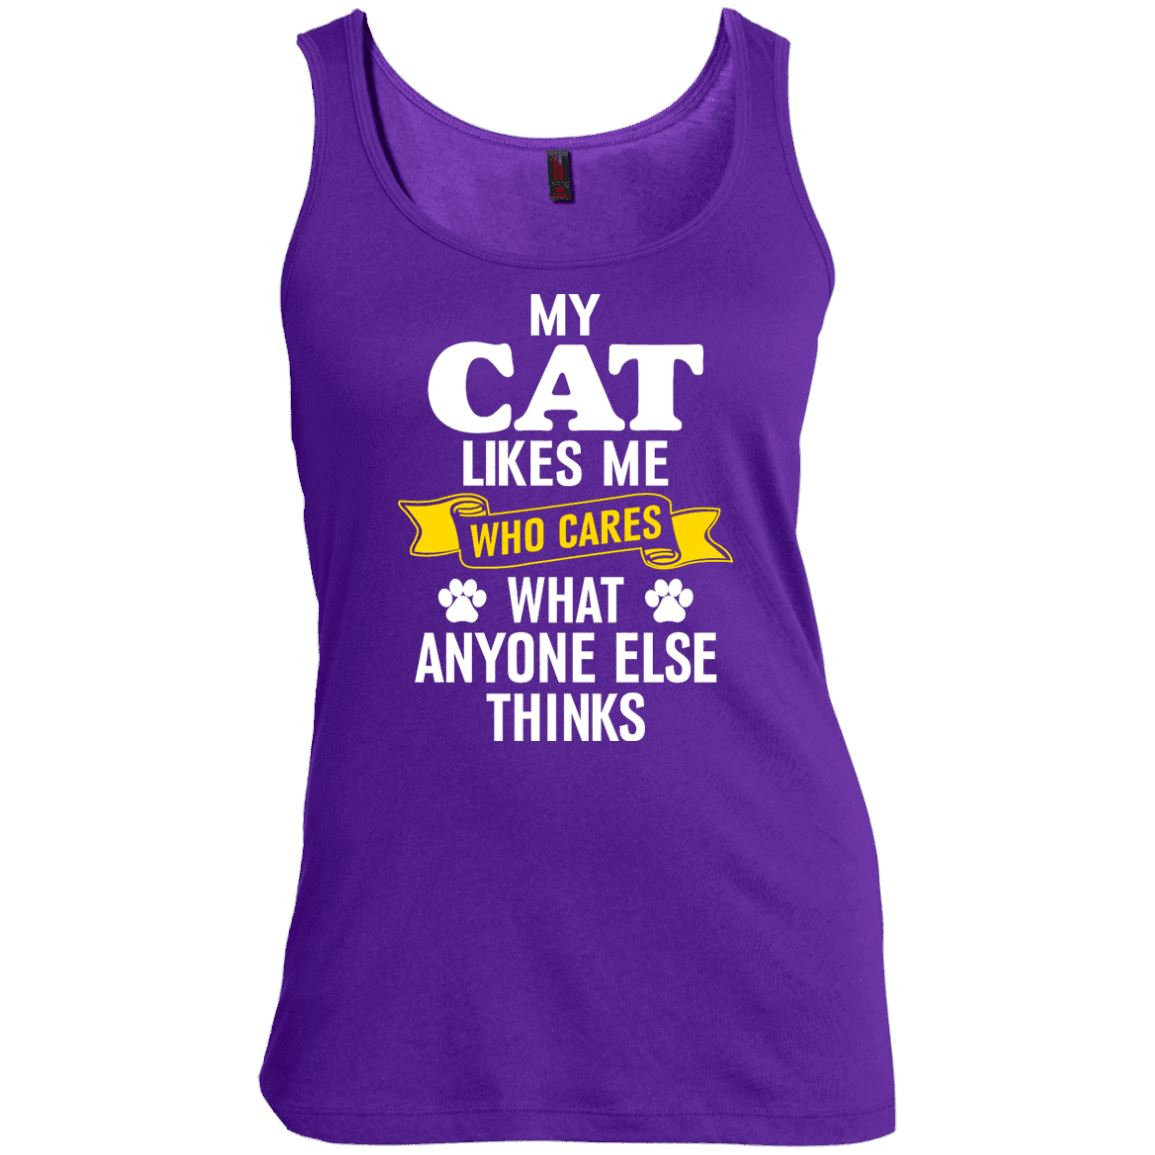 Cat Tee - My Cat Likes Me, Who Cares What Anyone Else Think - CatsForLife